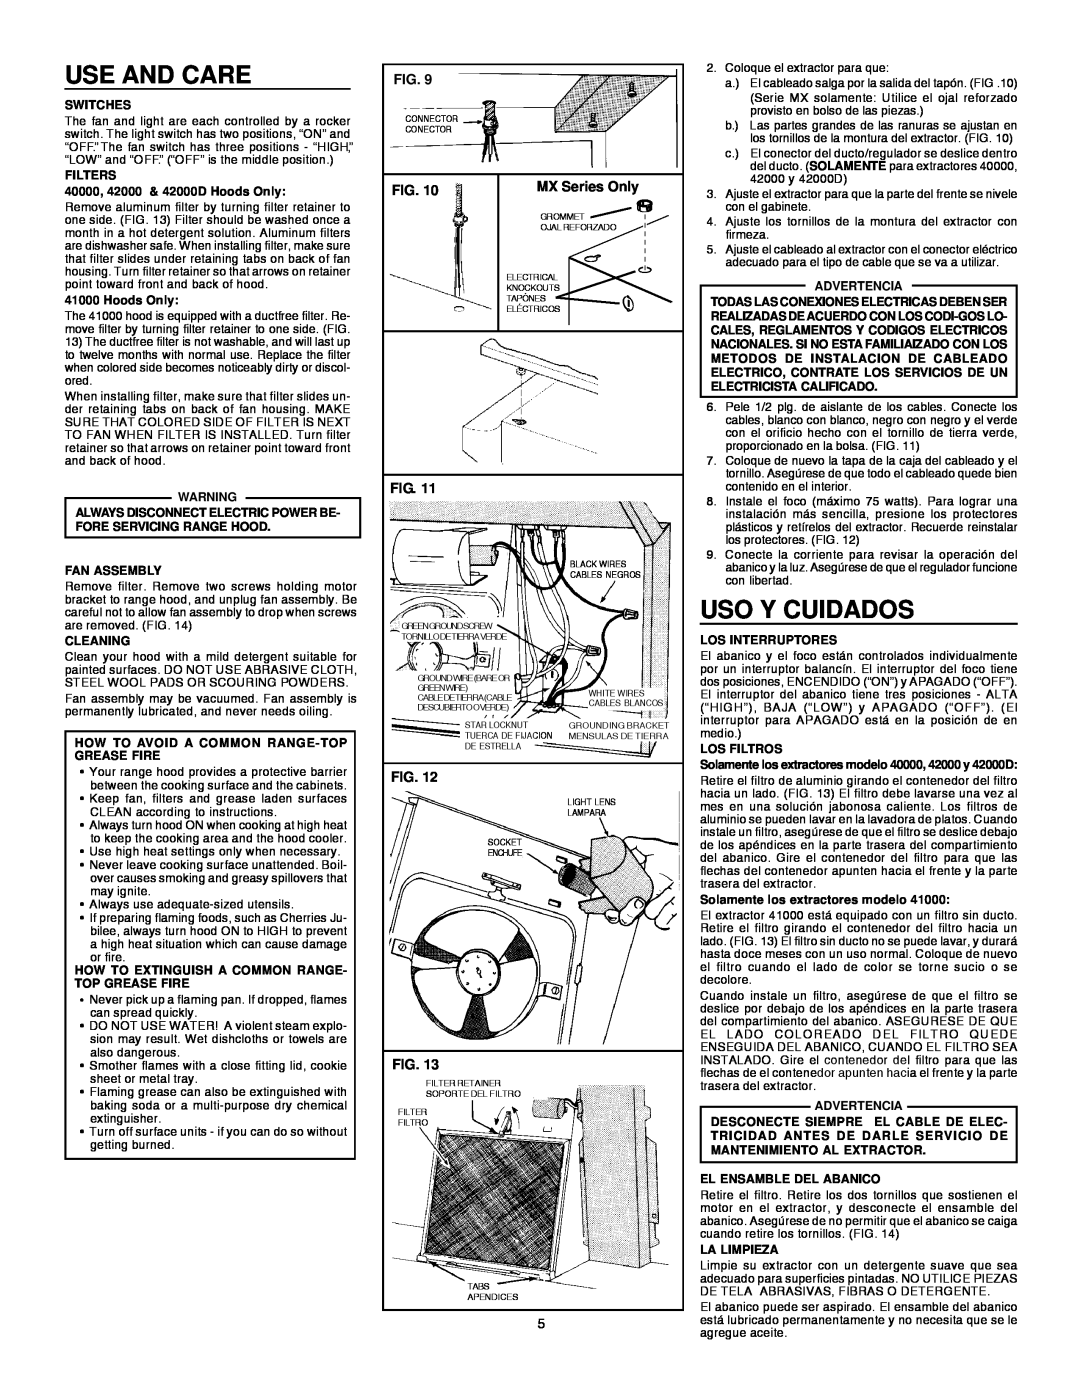 Broan 413002 installation instructions Use And Care, Uso Y Cuidados, MX Series Only 